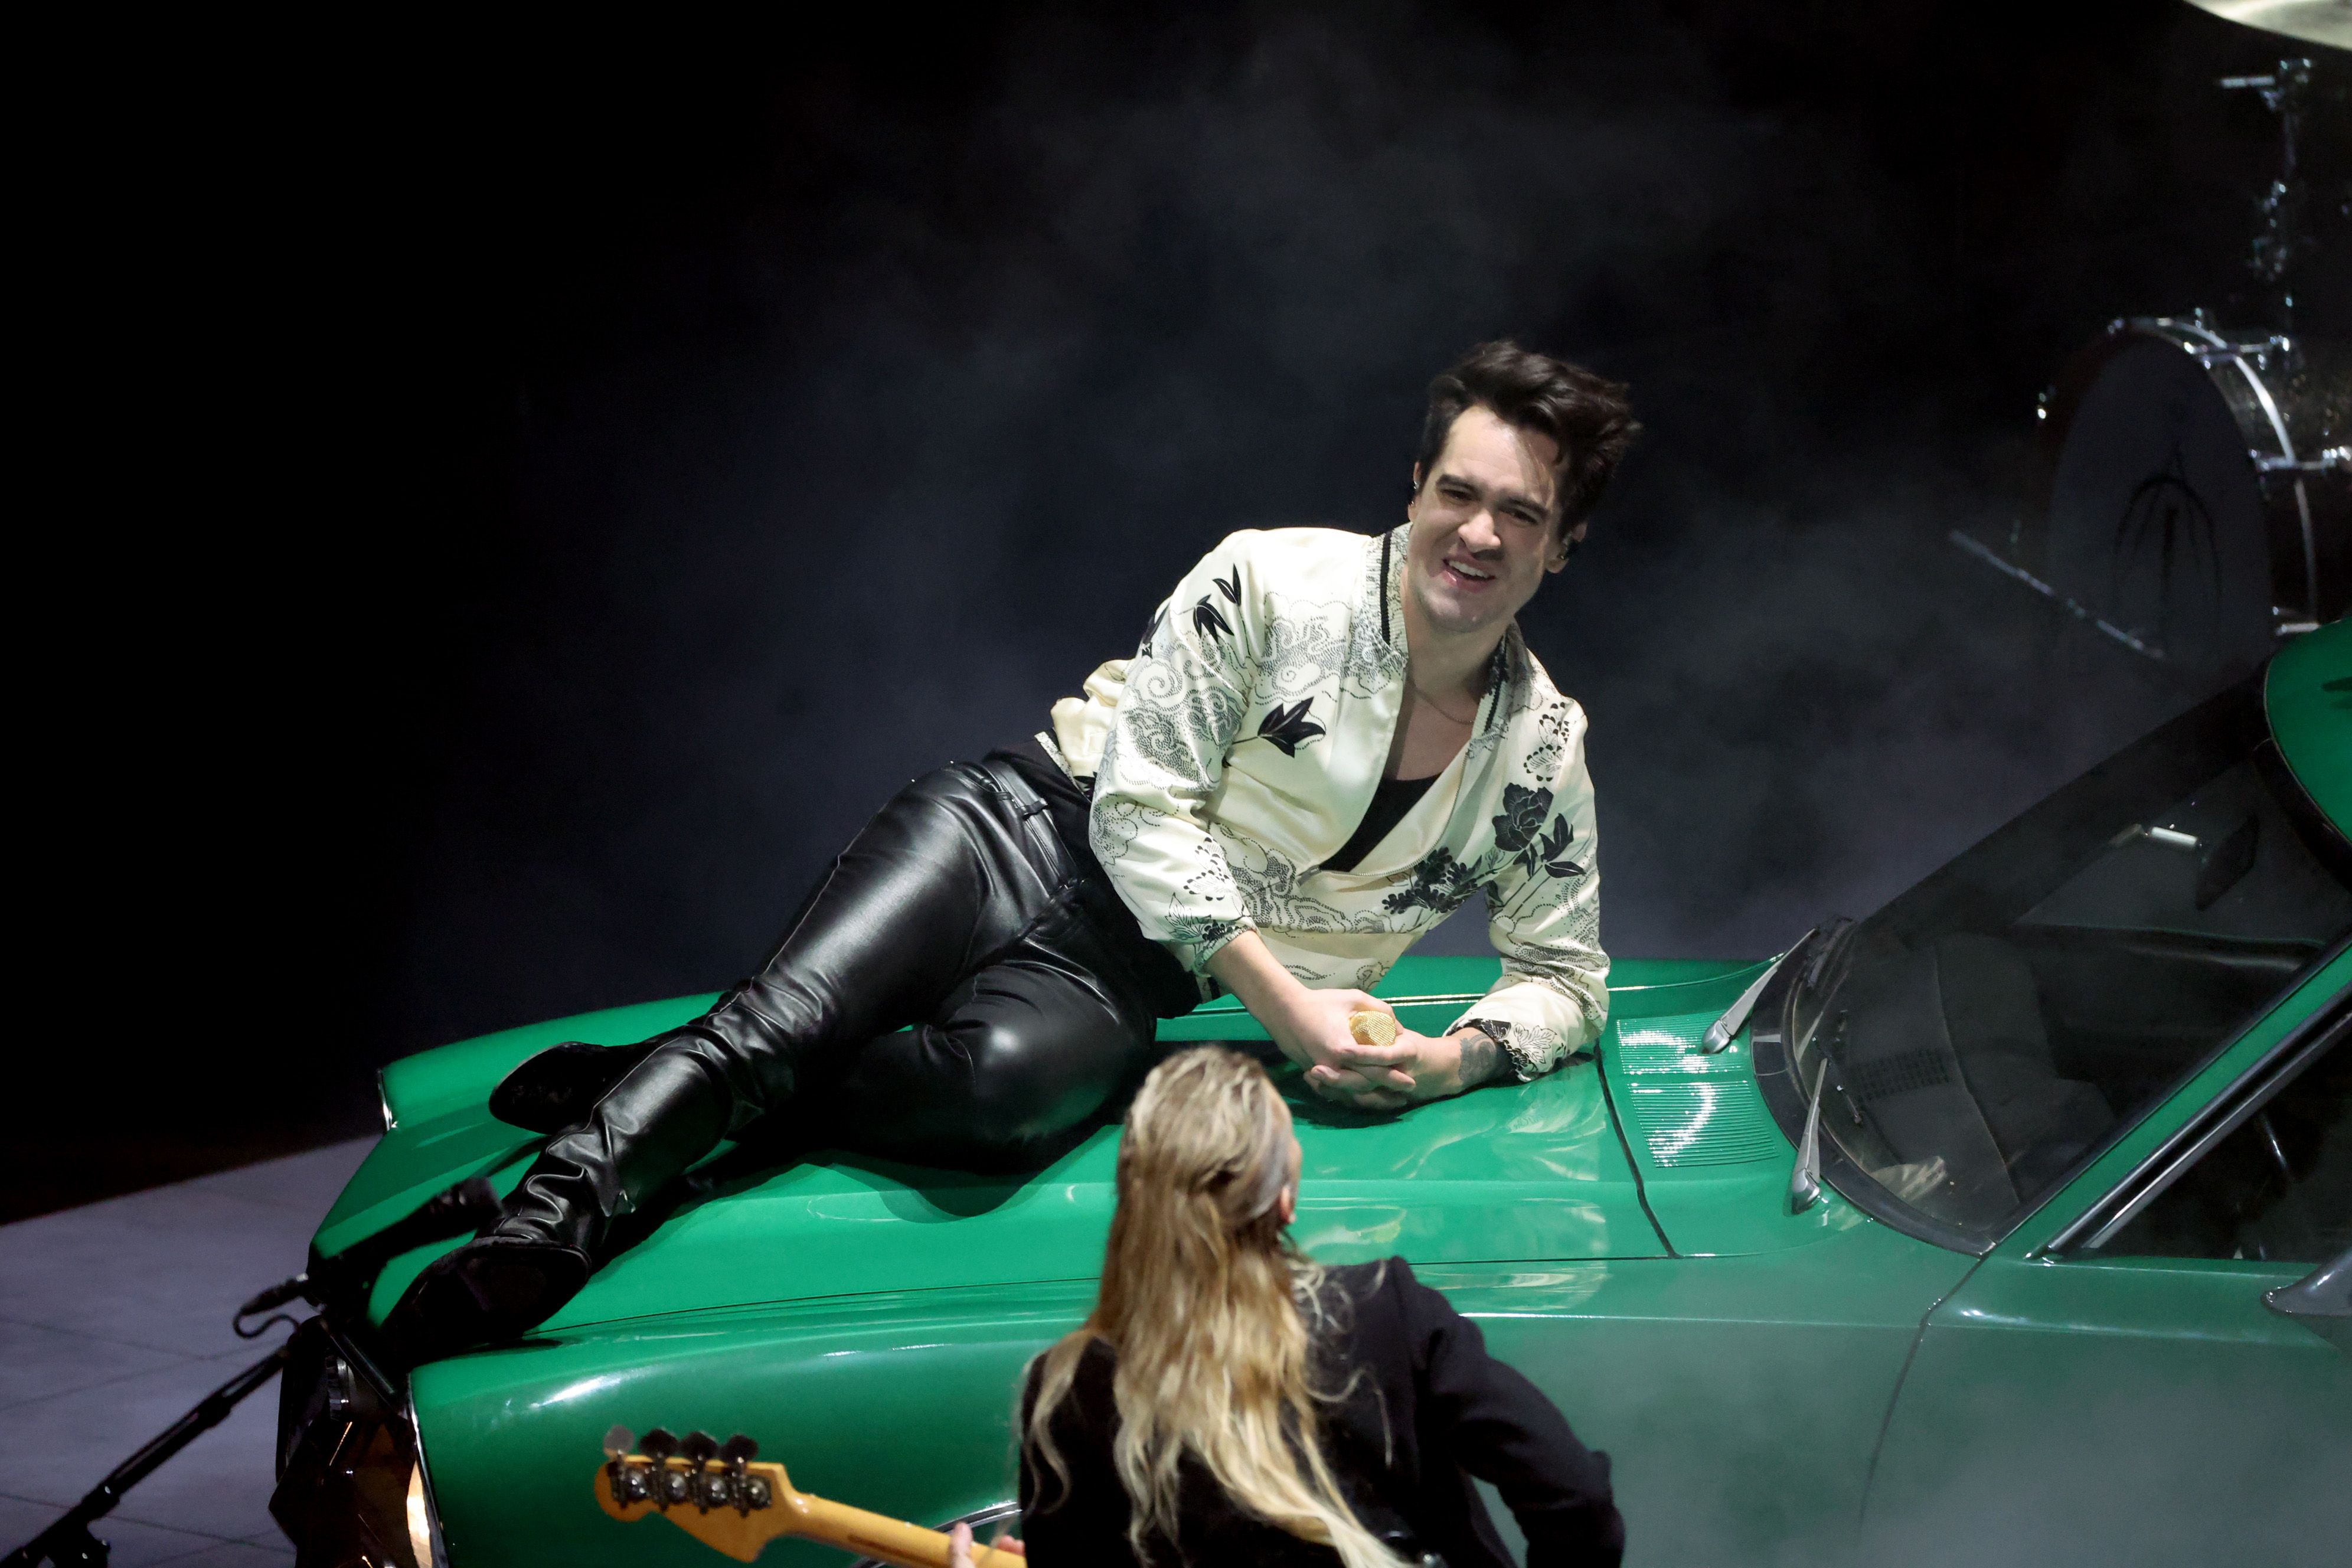 panic at the disco discography extra torrent